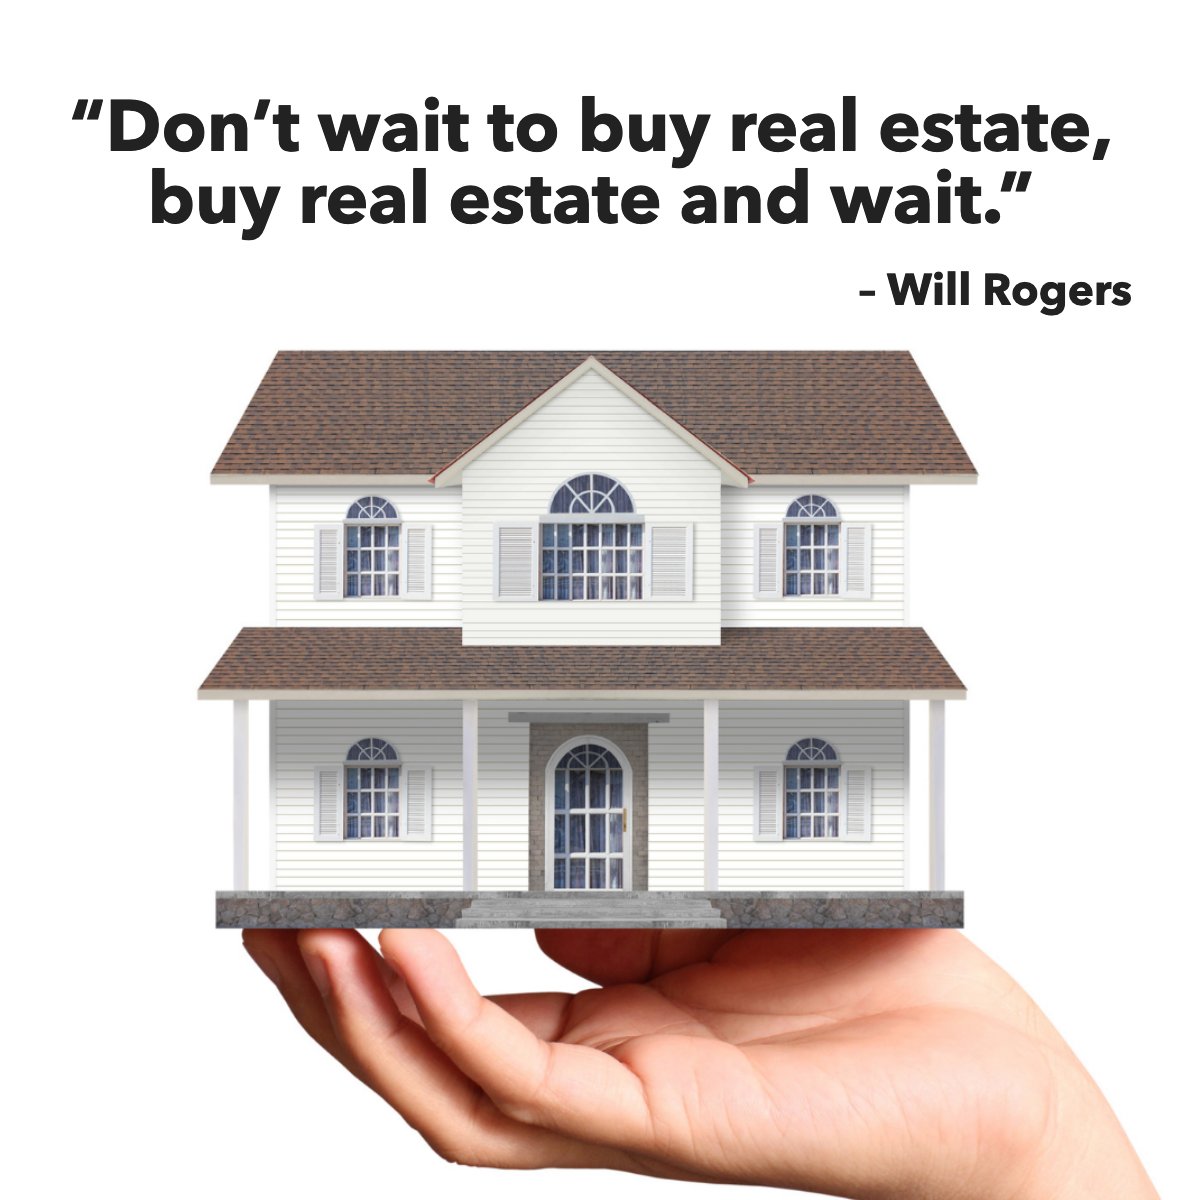 'Don't wait to buy real estate, buy real estate and wait.' 
― Will Rogers 📖

#realestate #house #buying #investing #invest #propertyinvestment #quote #quoteoftheday #WillRogers
 #swfl #oleglisitsyn #oleglis #sarasota #Florida #wearemvp #sarasotarealtor